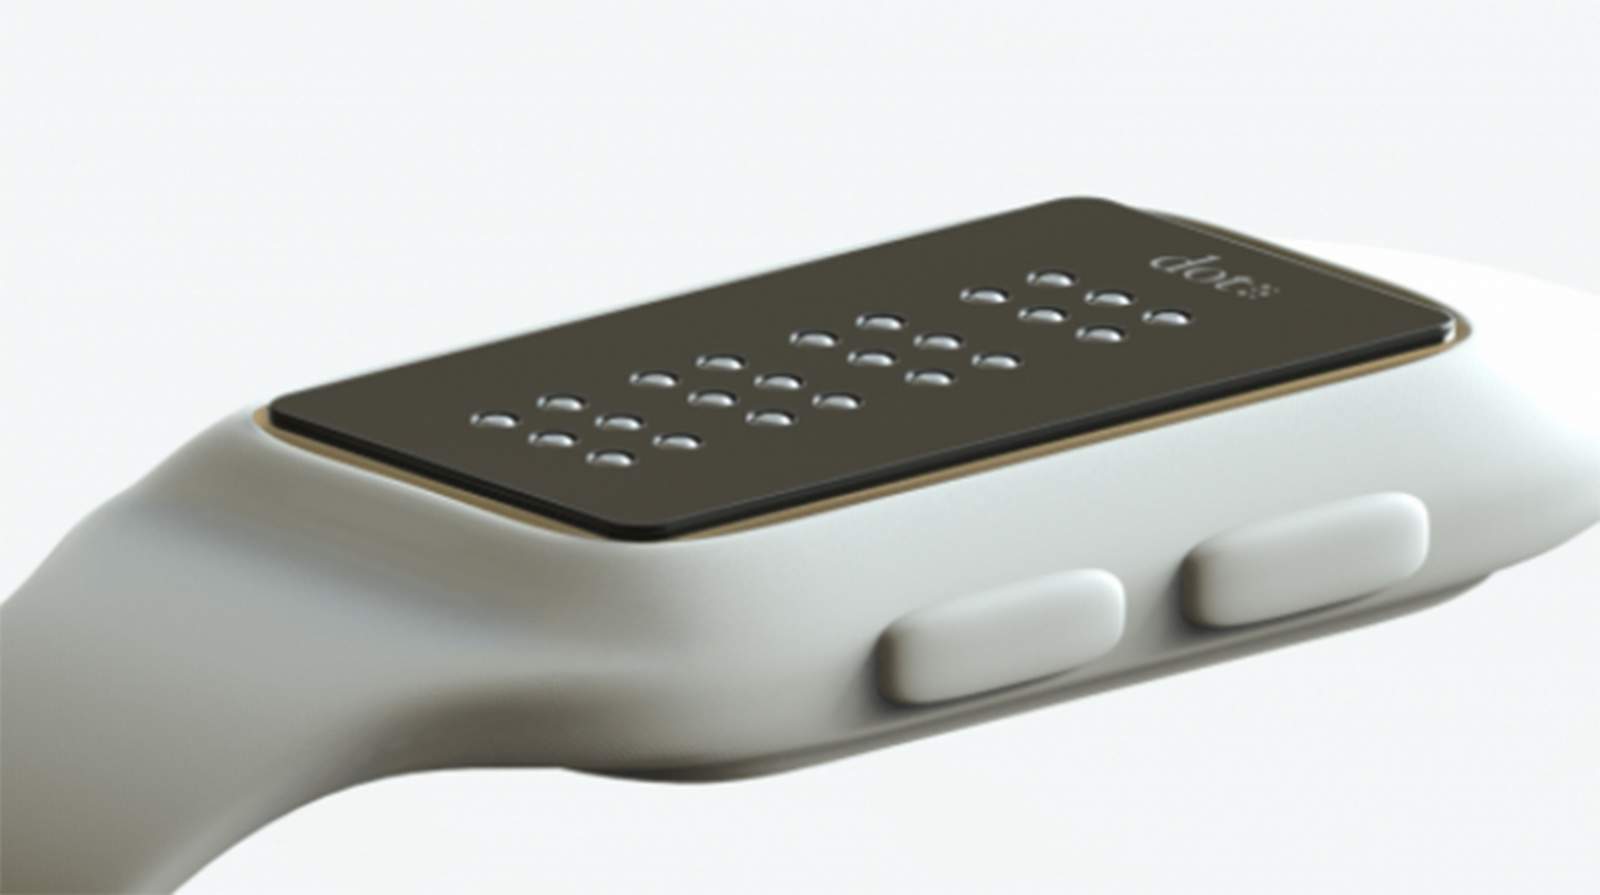 The Dot smartwatch has a changing braille face to help visually impaired users receive digital information.